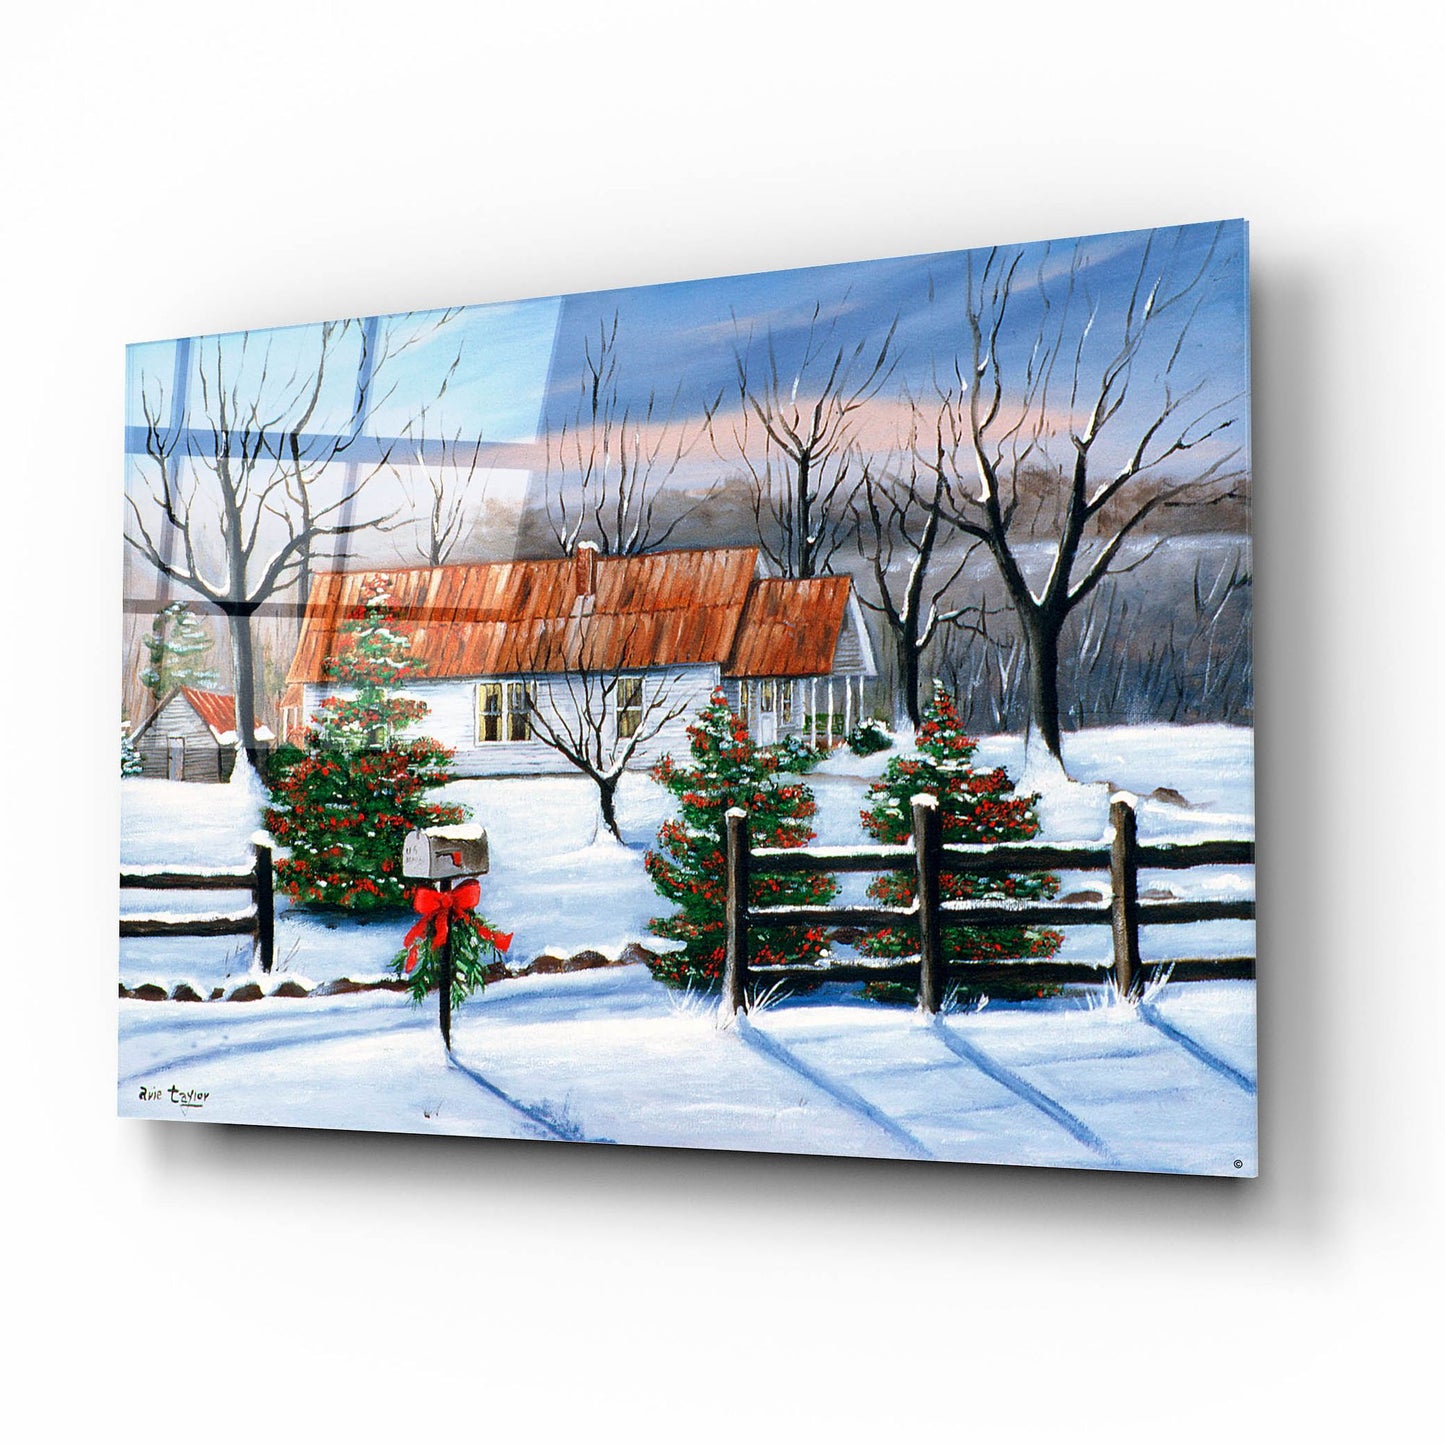 Epic Art 'Mom and Dad's at Christmas' by Arie Reinhardt Taylor, Acrylic Glass Wall Art,16x12